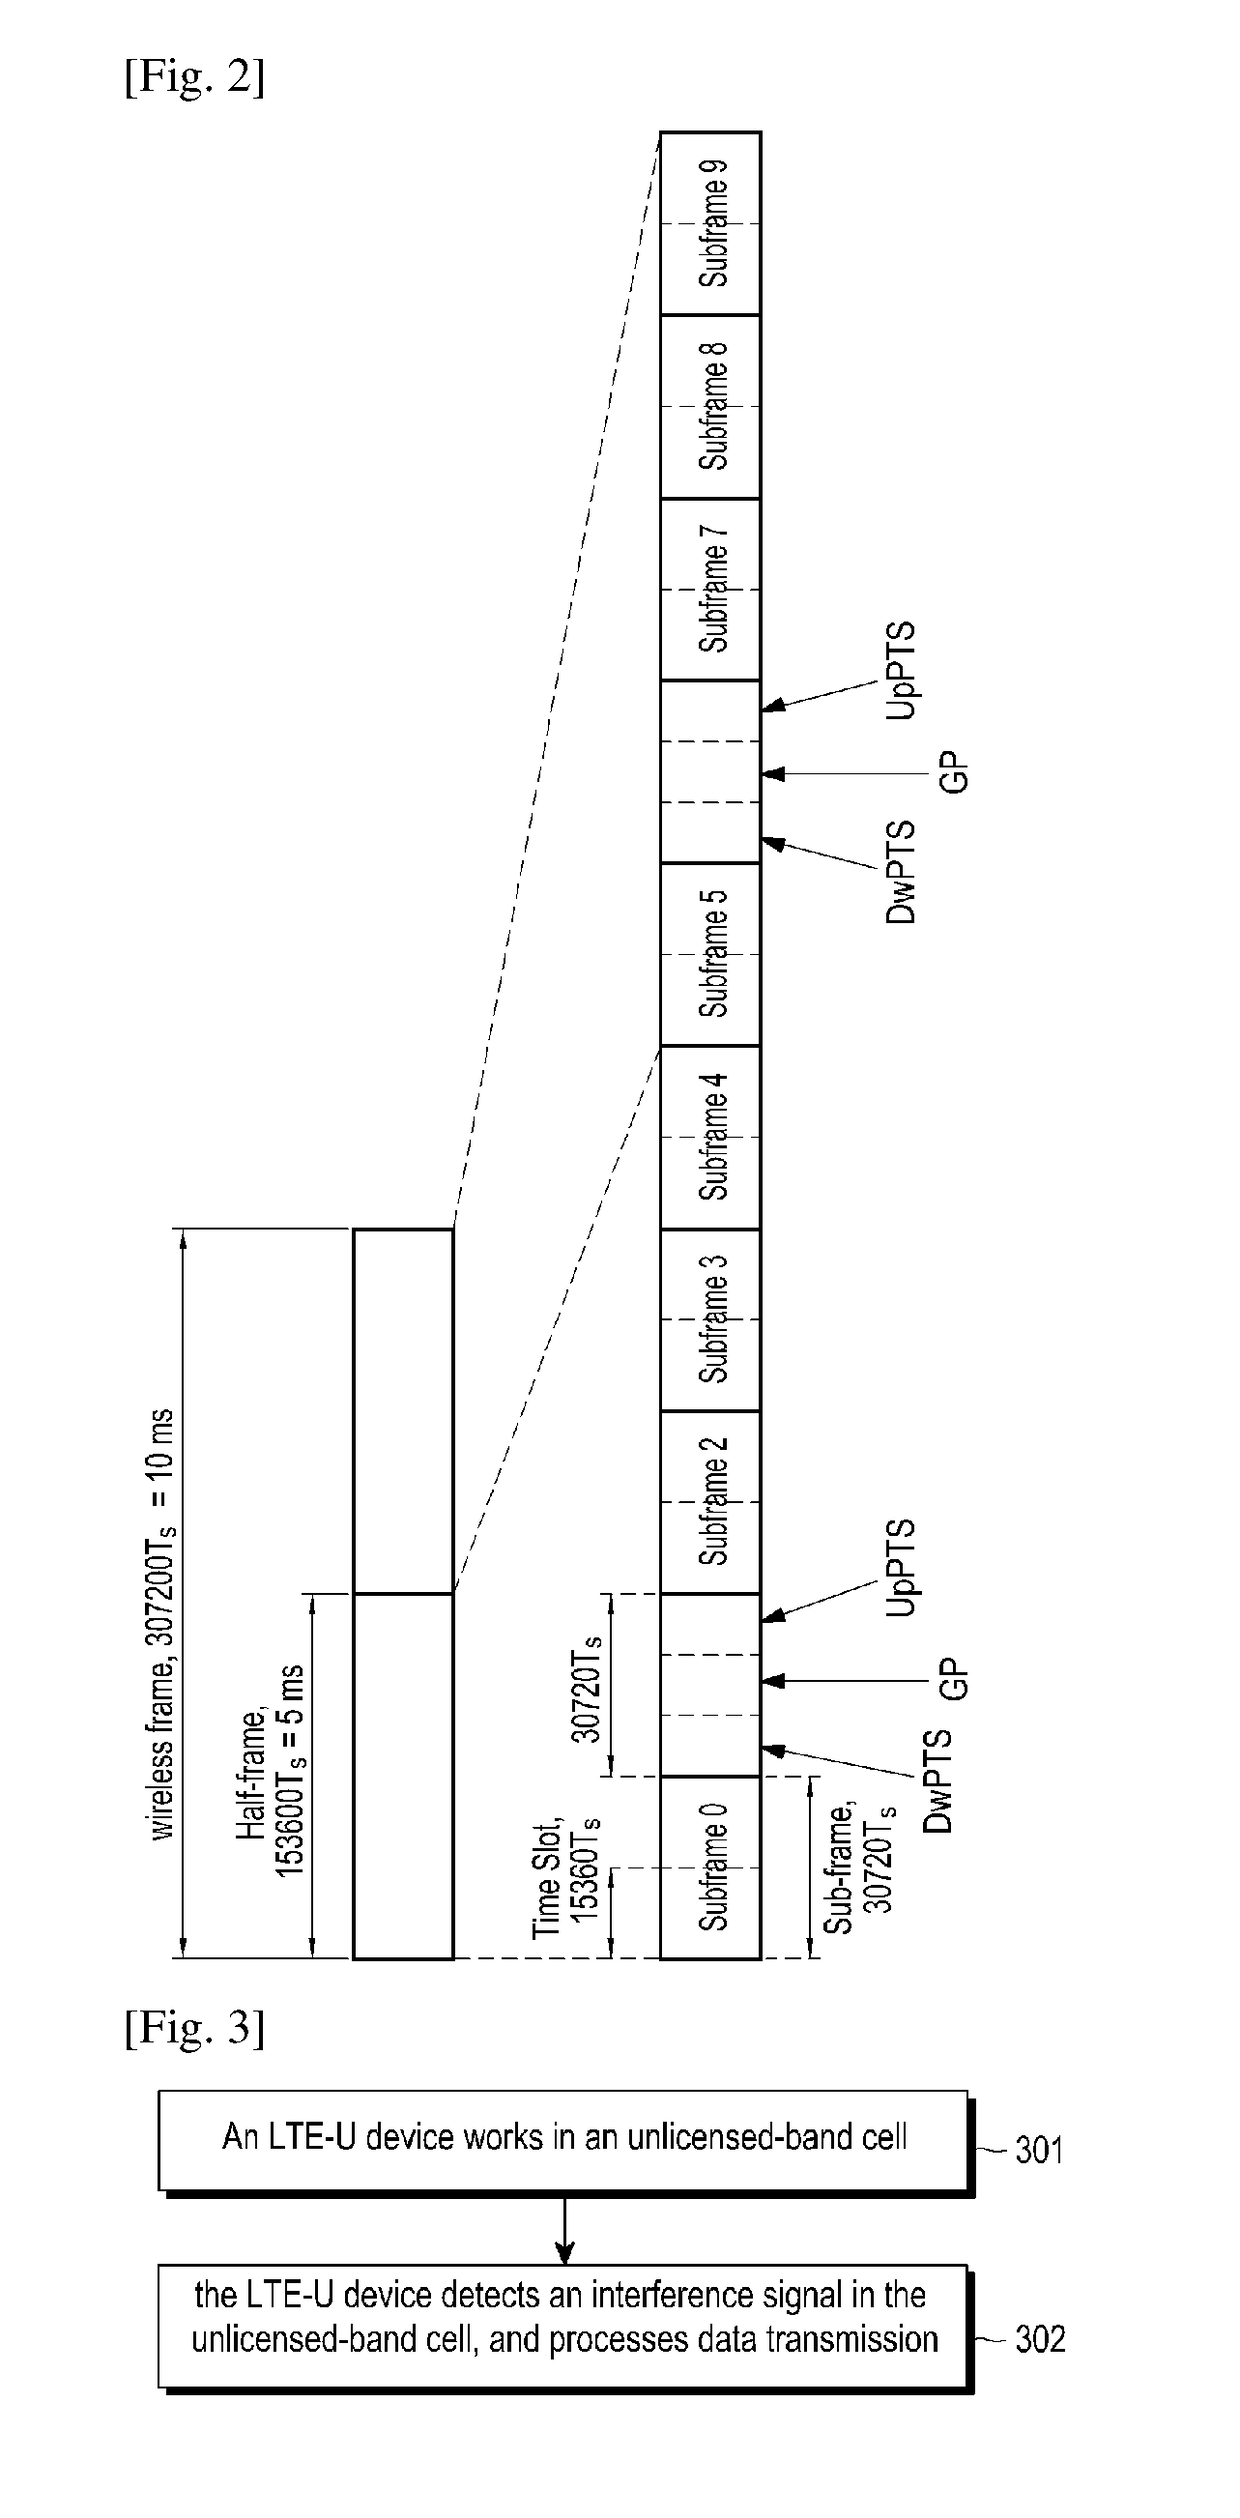 Method and device for interference detection on unlicensed band